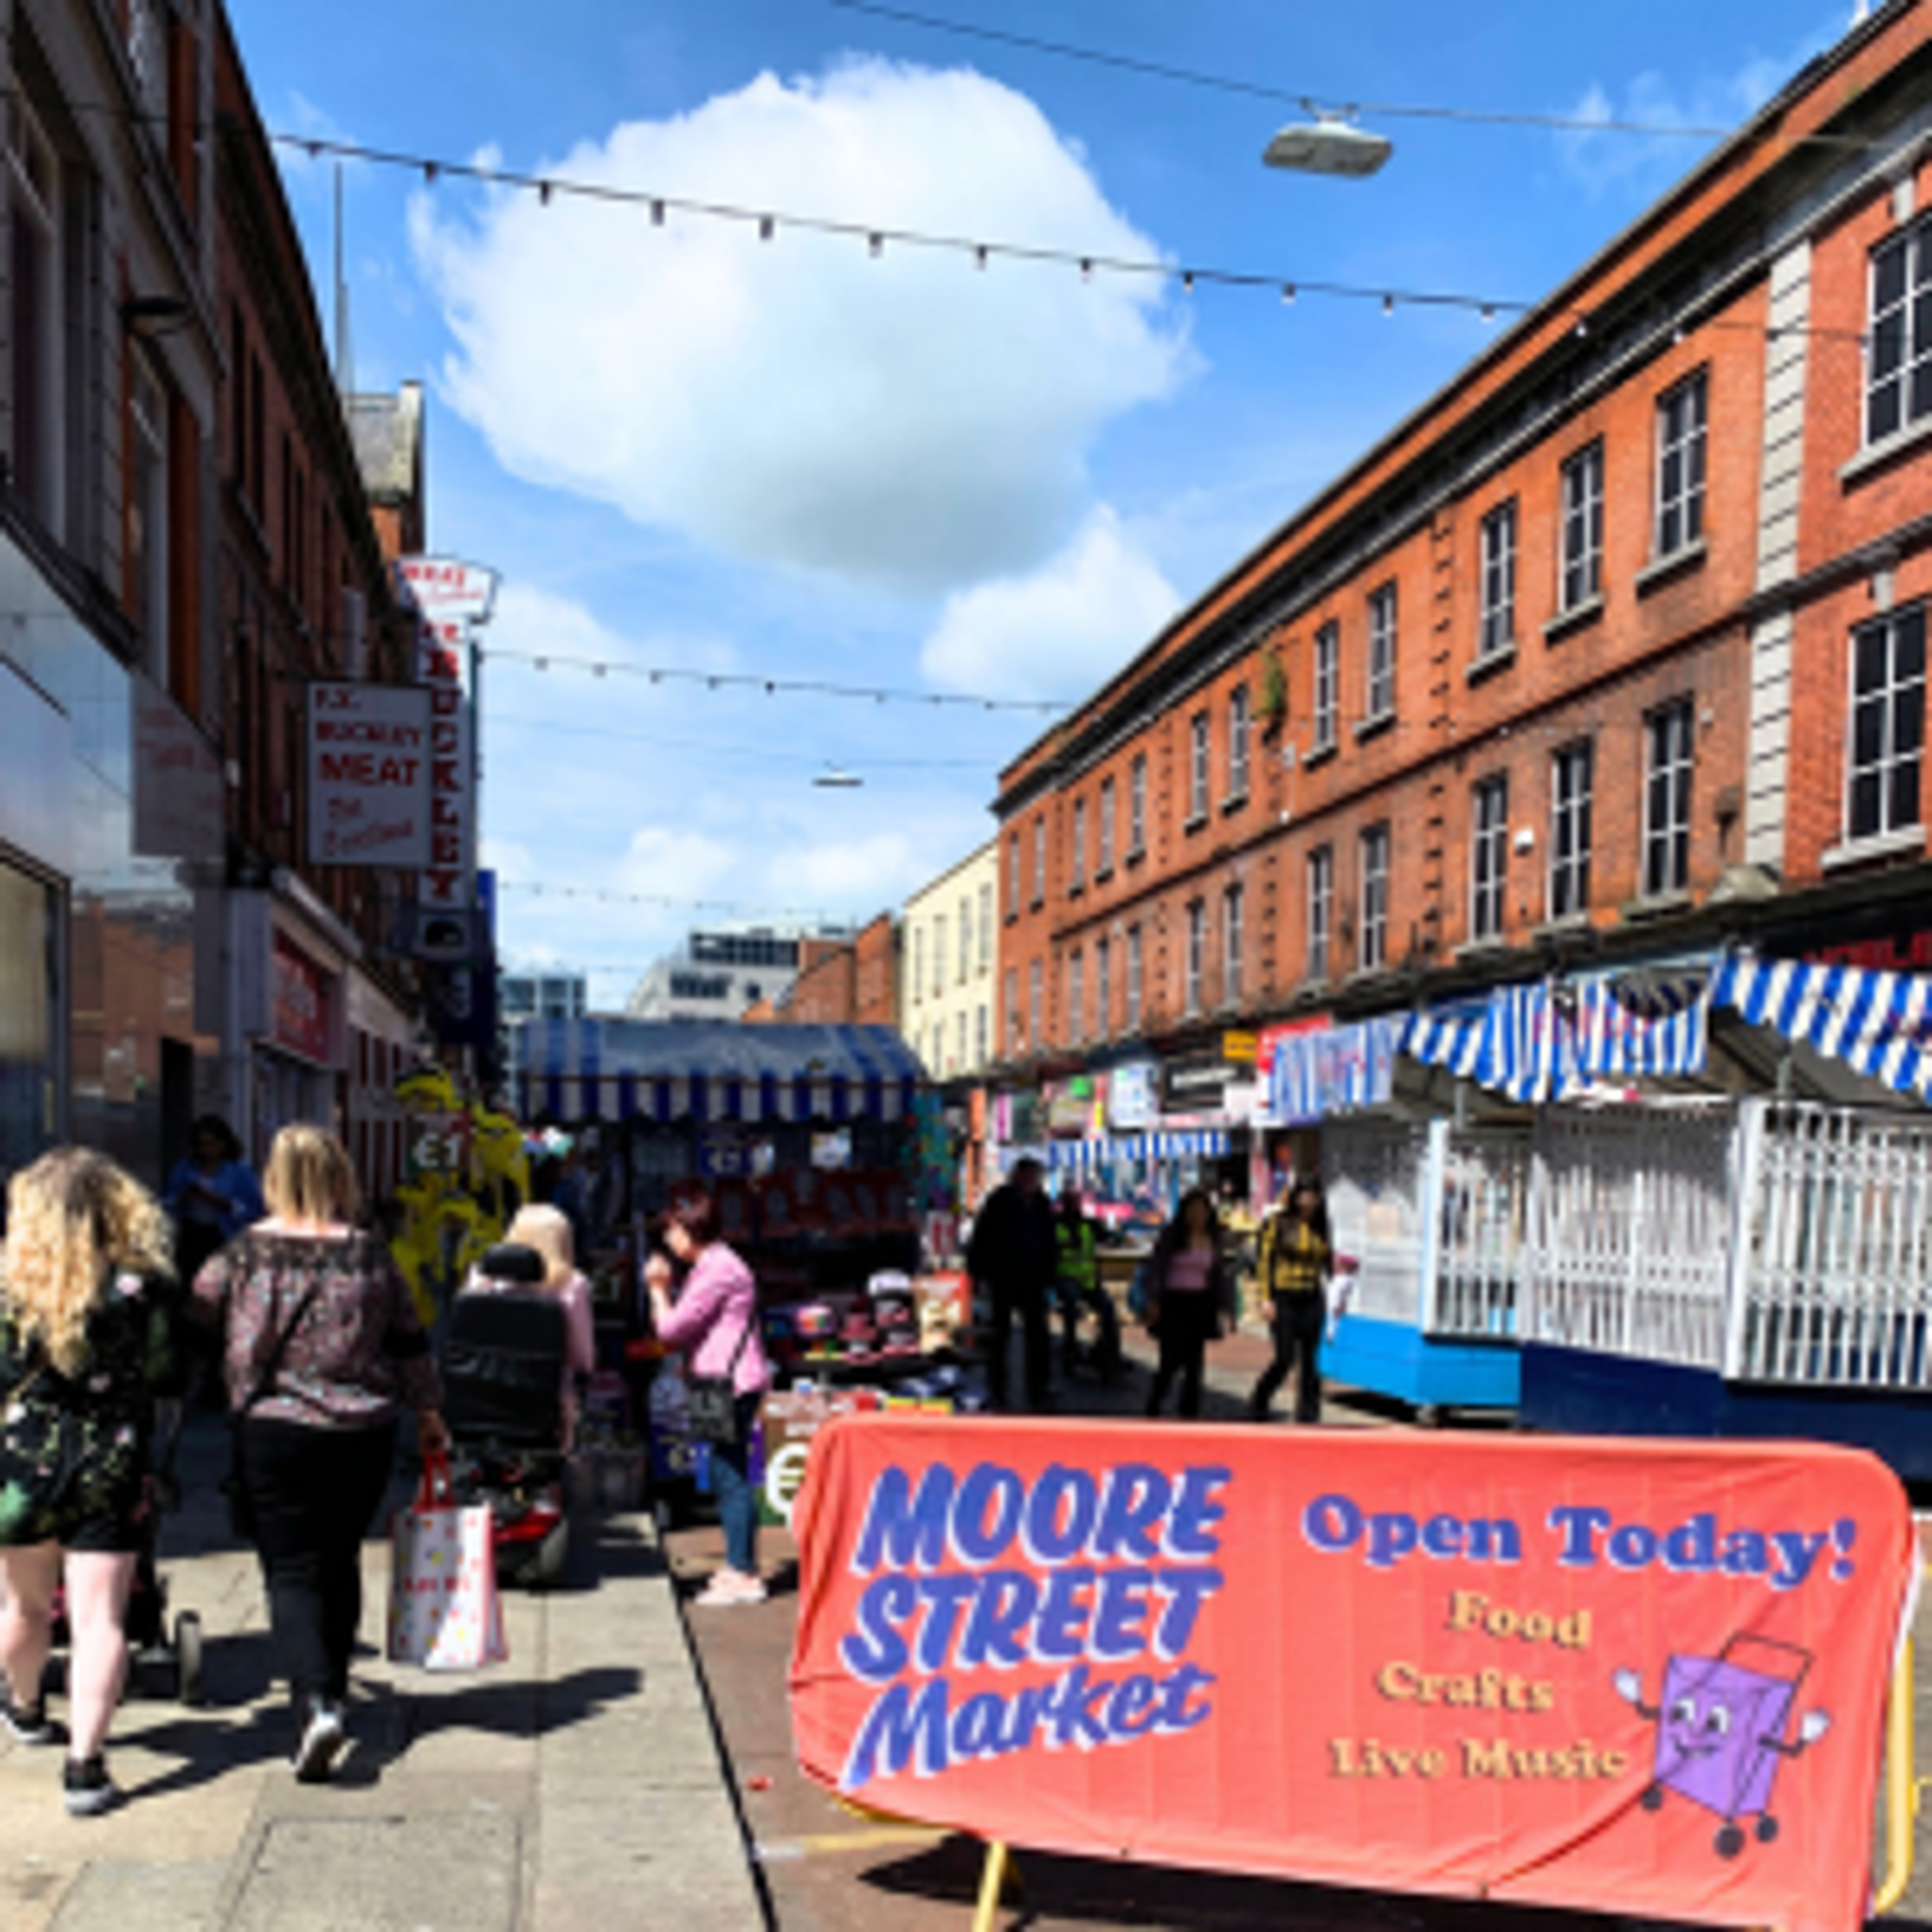 Street Food and craft stands at Moore Street Market in Dublin